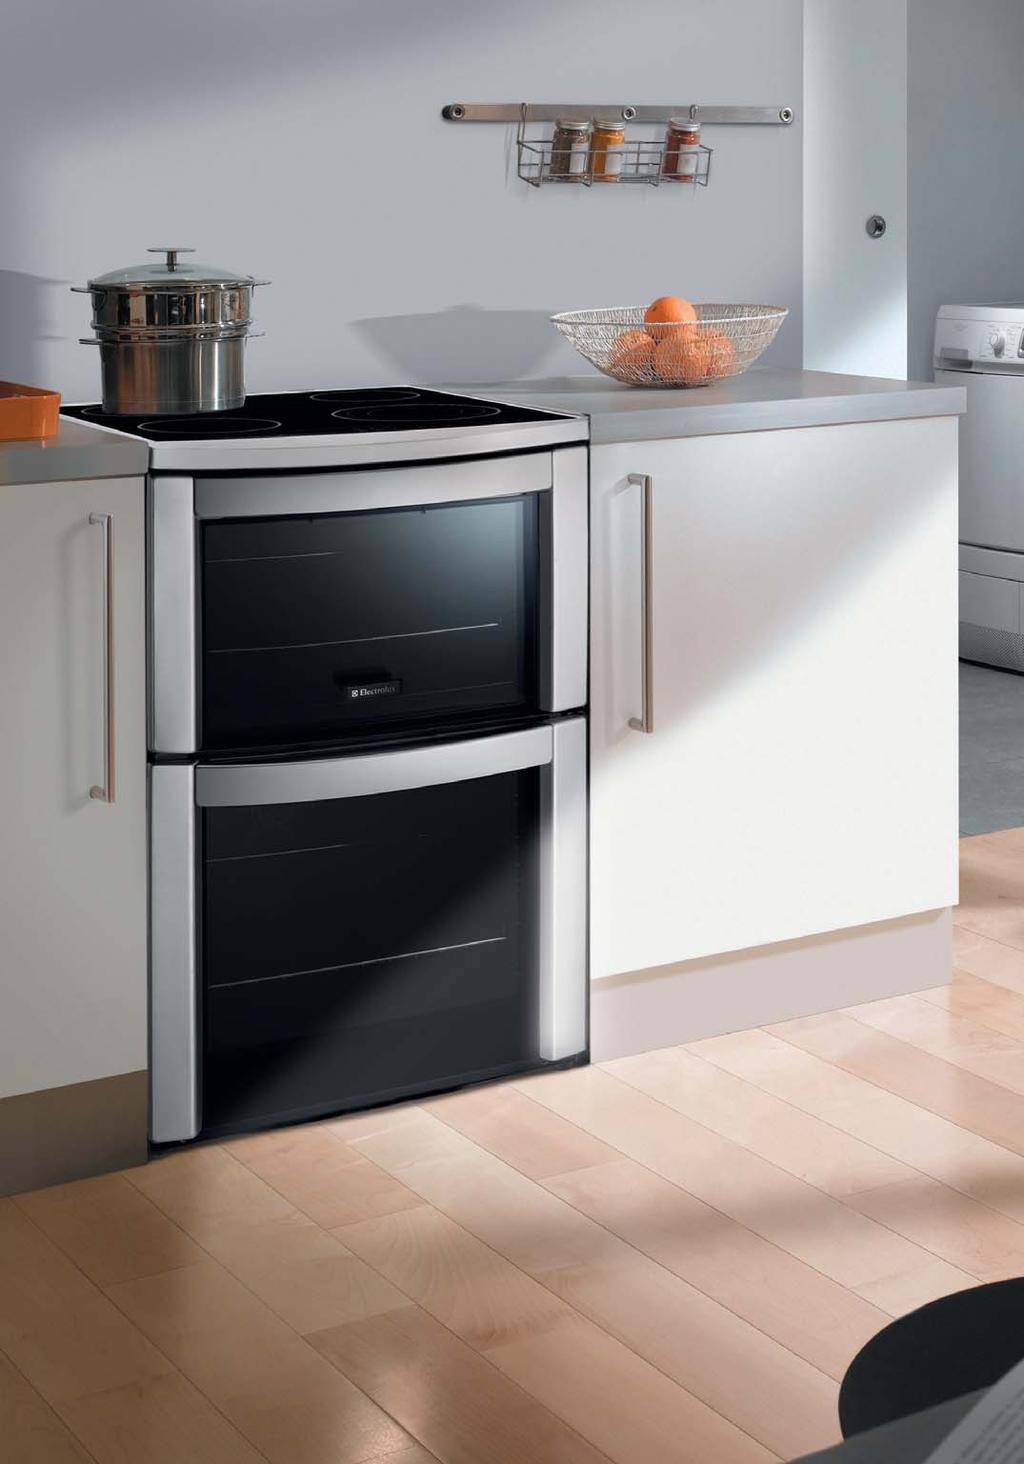 54 electrolux cooking electrolux cooking 55 Fantastic freestanding cookers designed with you in mind. The cooker is the heart of the home and one of the most important choices you will make.